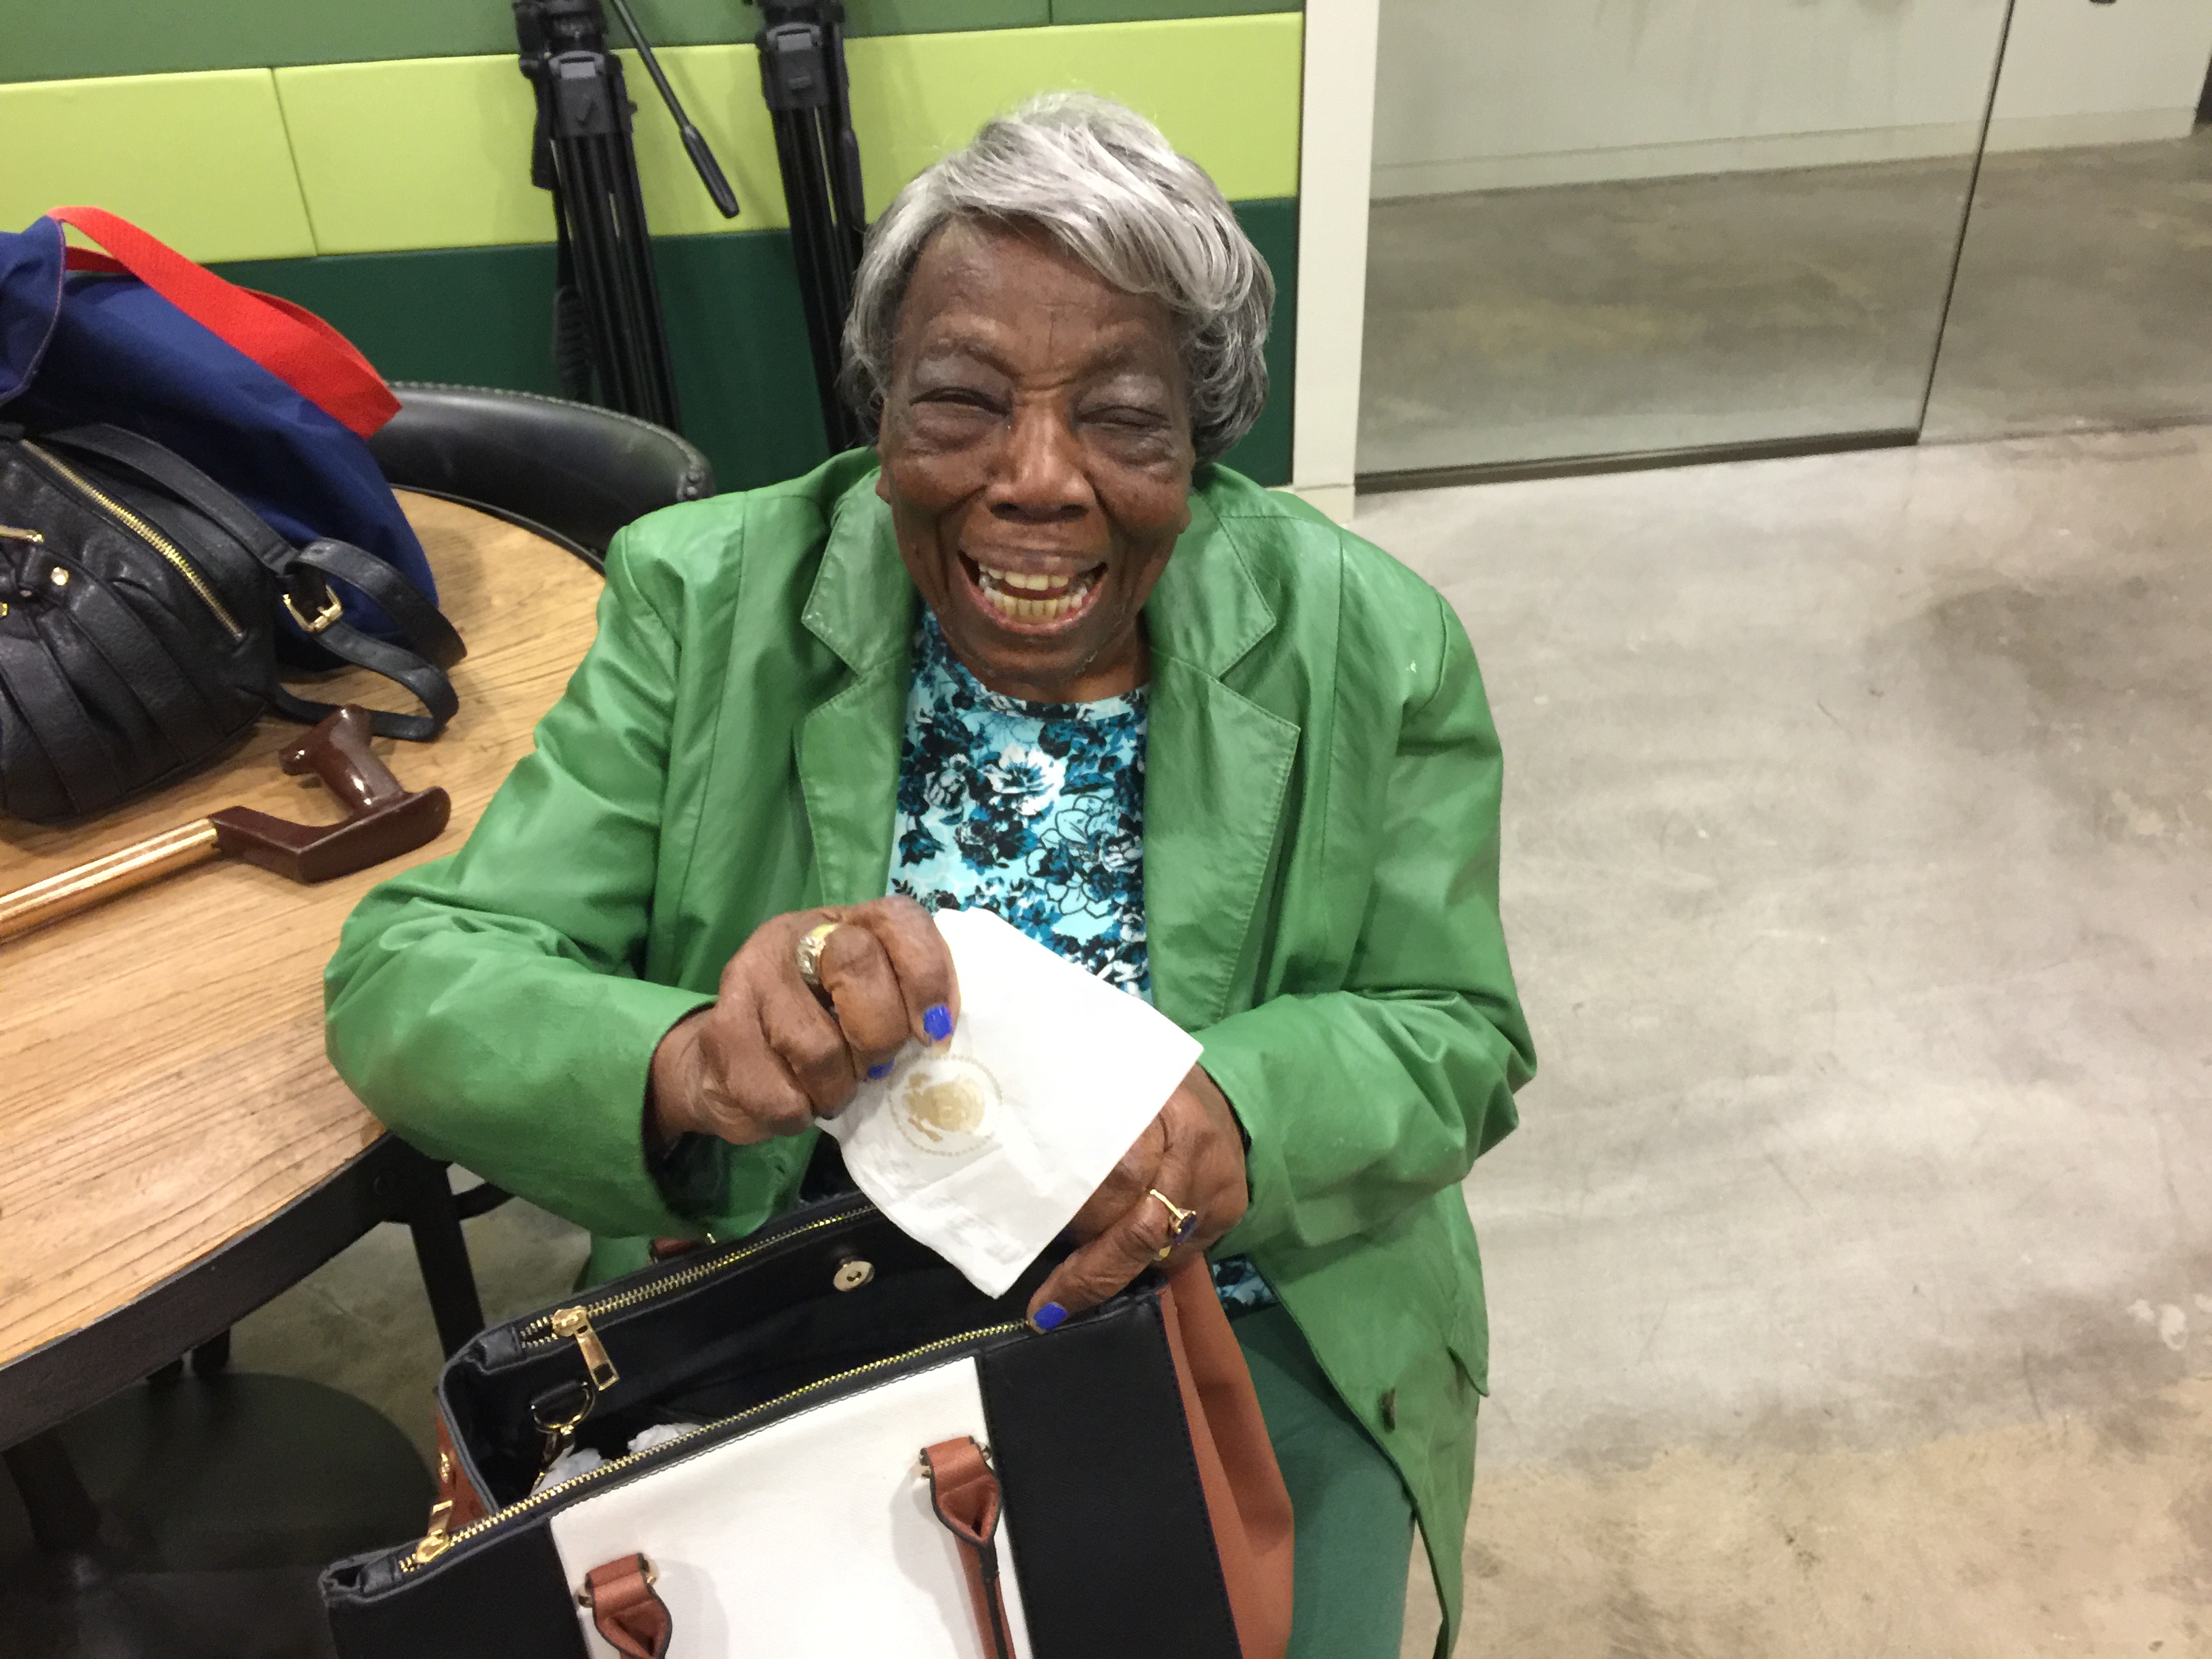 107-year-old DC resident Virginia McLaurin honored by city council